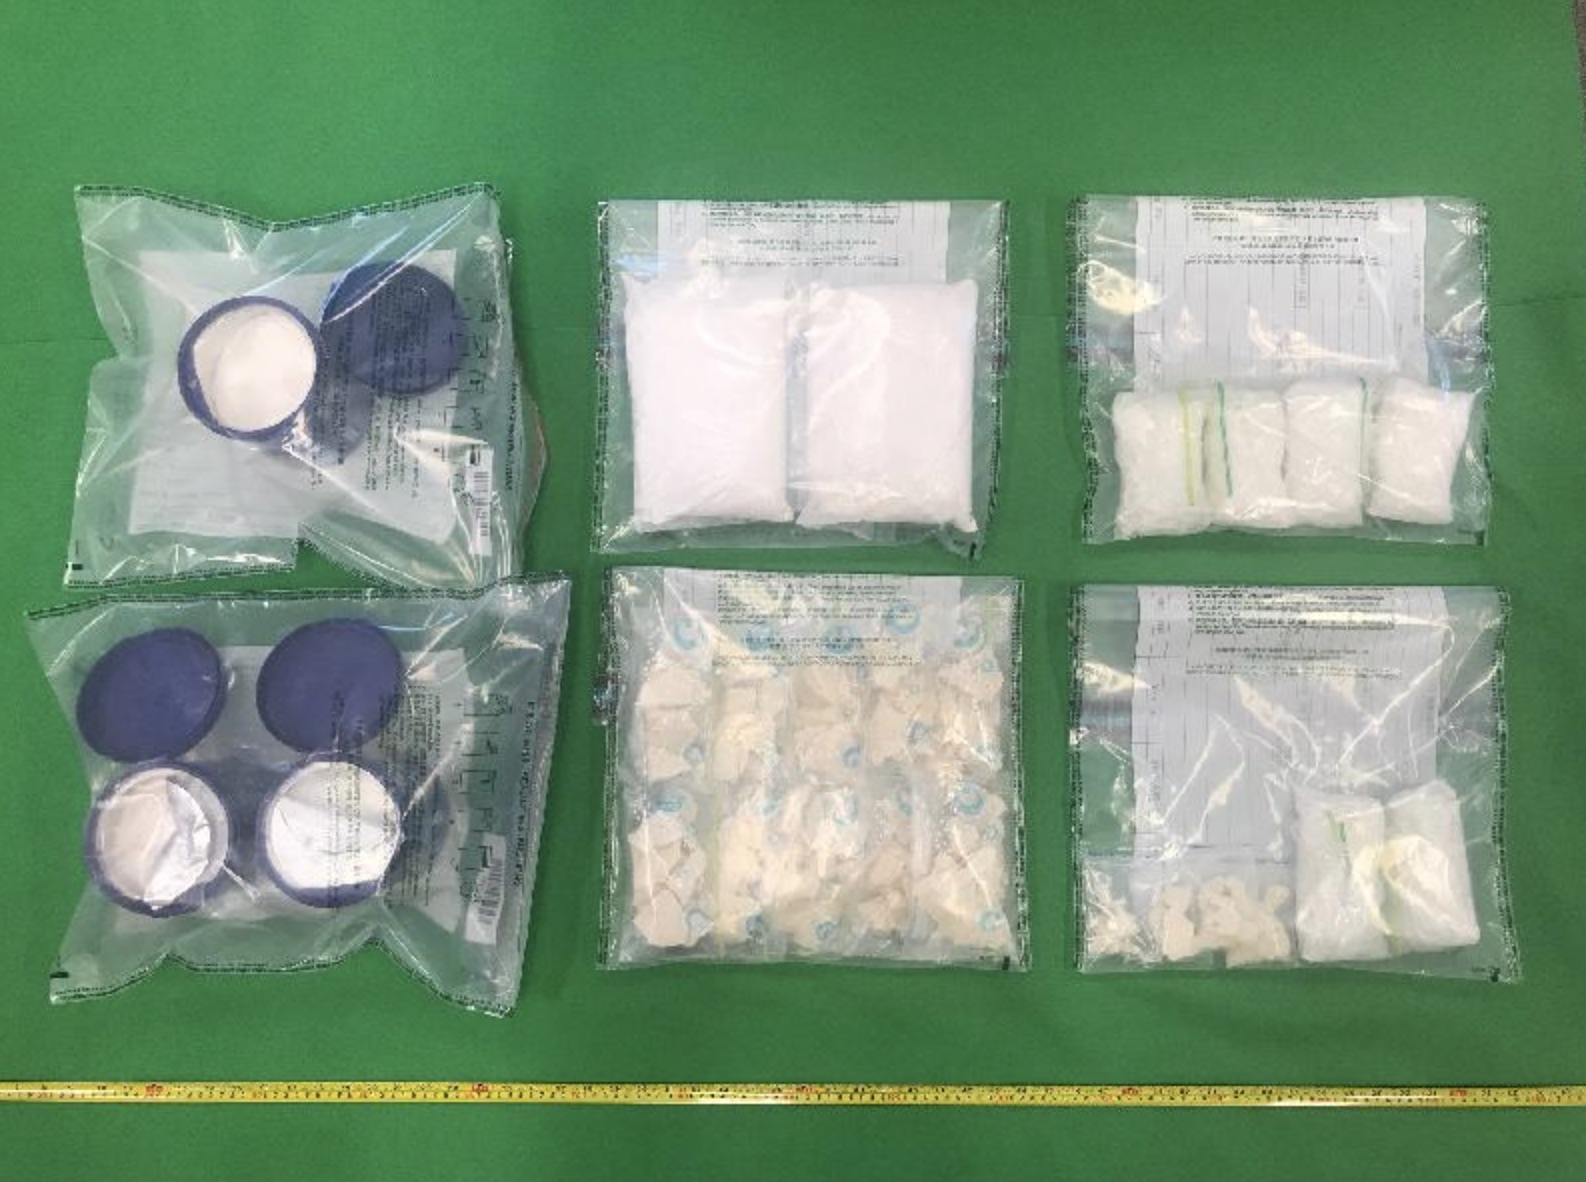 Hong Kong Customs seized about 3.2 kilograms of suspected crack cocaine and 4.8kilograms of suspected cocaine with a total estimated market value of about US$1.4 million in To Kwa Wan. Photo via Gov HK.